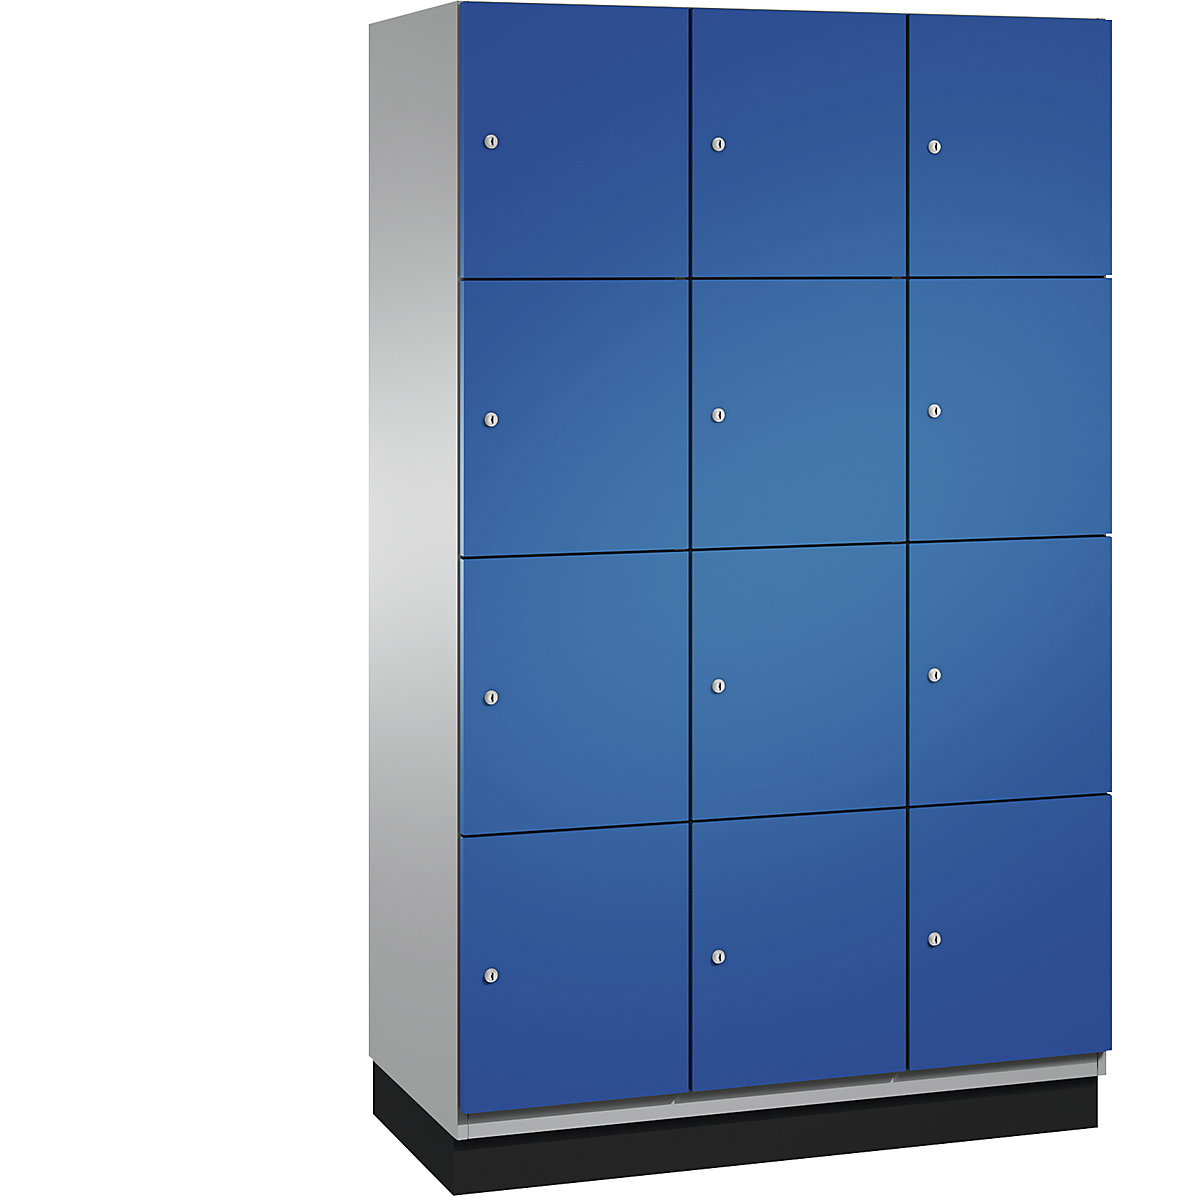 CAMBIO compartment locker with sheet steel doors – C+P, 12 compartments, width 1200 mm, body white aluminium / door gentian blue, compartment height 462.5 mm-7